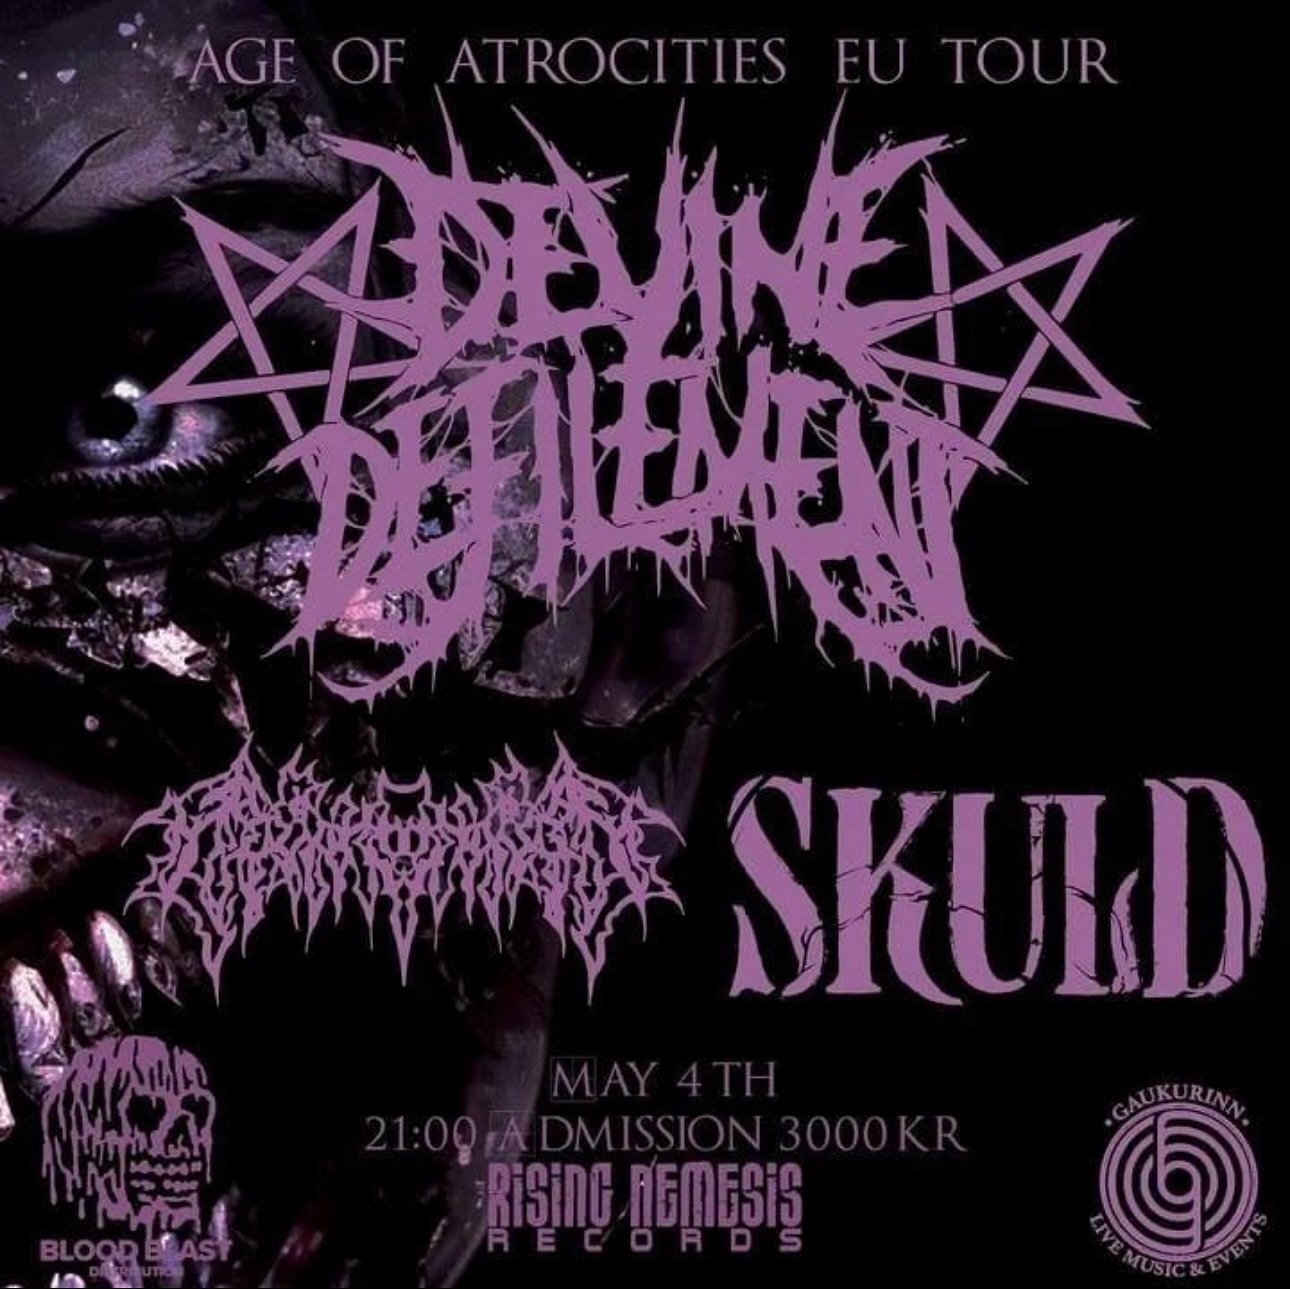 TONIGHT!
Divine Defilement starts their tour at Gaukurinn before leaving to conquer Europe alongside Vamp&iacute;ra and Skuld

Come on down and be ready to be demolished!

Happy Hour from 17 - 21
Cocktail Hour from 20 - 21